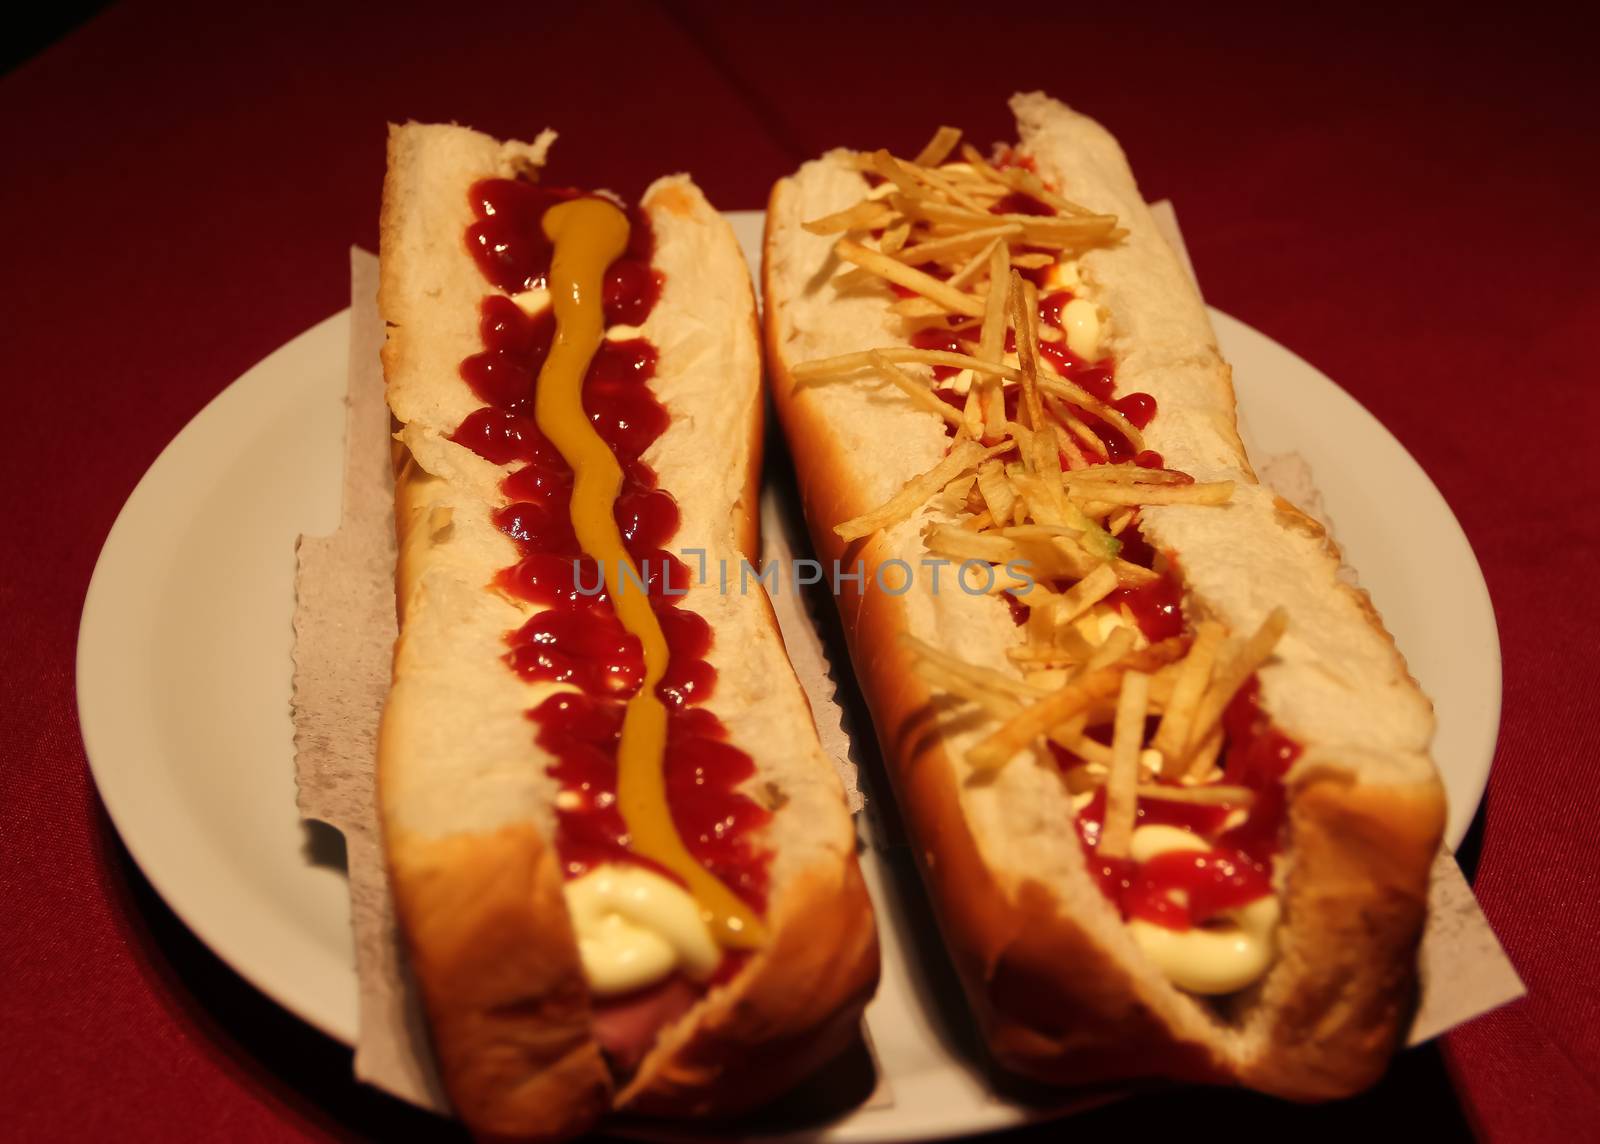 big hot dog with sauces and french fries by GabrielaBertolini